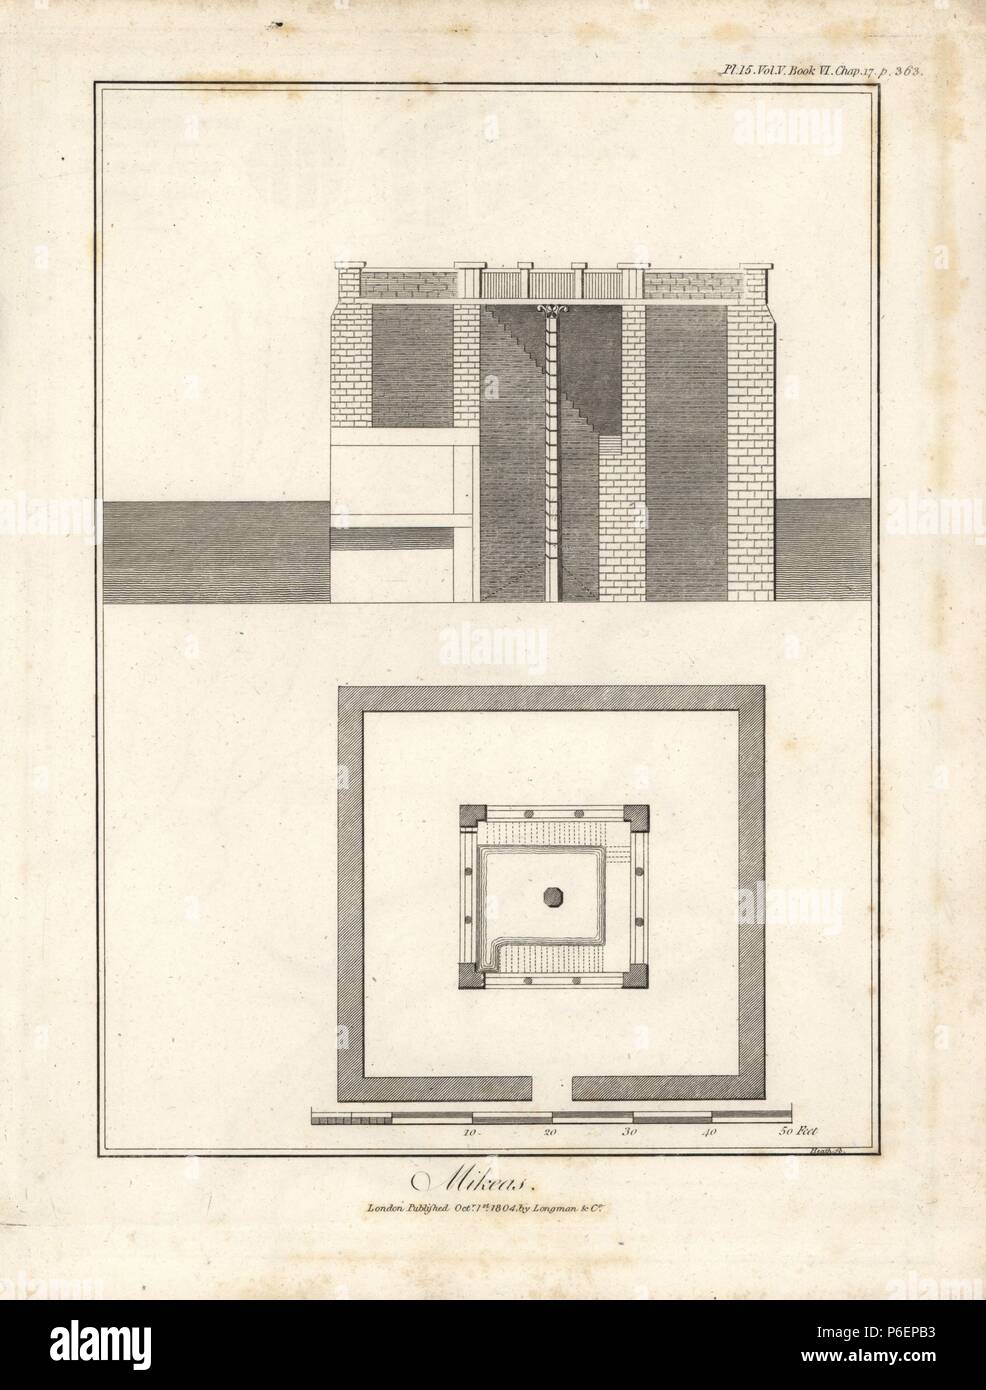 Plan and elevation of a Mikeas. Copperplate engraving from James Bruce's 'Travels to Discover the Source of the Nile, in the years 1768, 1769, 1770, 1771, 1772 and 1773,' London, 1790. James Bruce (1730-1794) was a Scottish explorer and travel writer who spent more than 12 years in North Africa and Ethiopia. Engraved by Heath after an original drawing by Bruce. Stock Photo